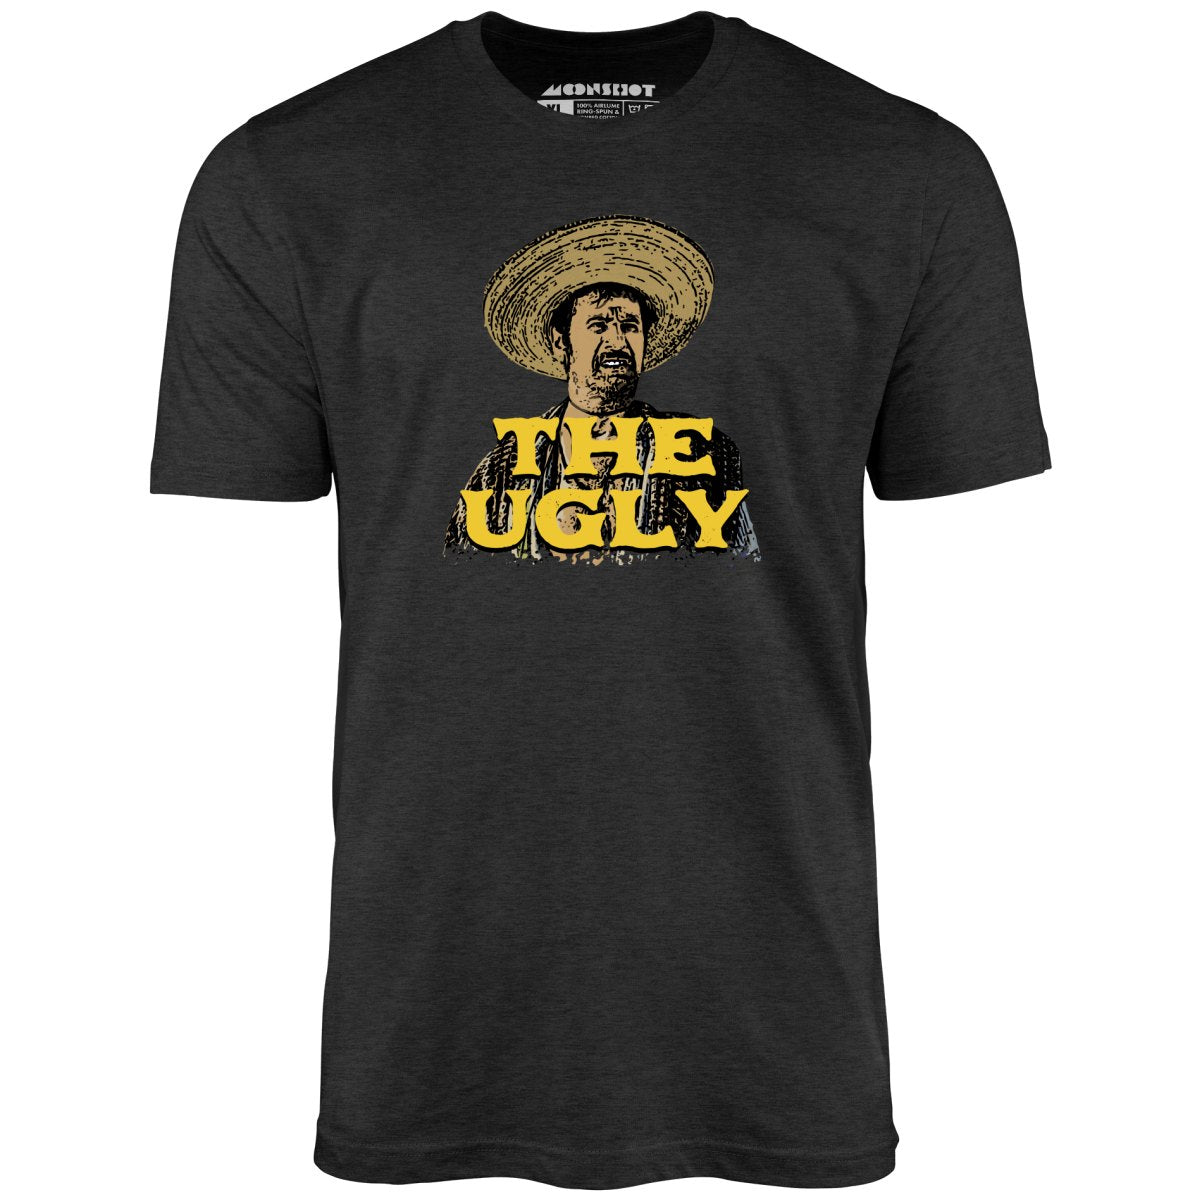 The Ugly - Unisex T-Shirt